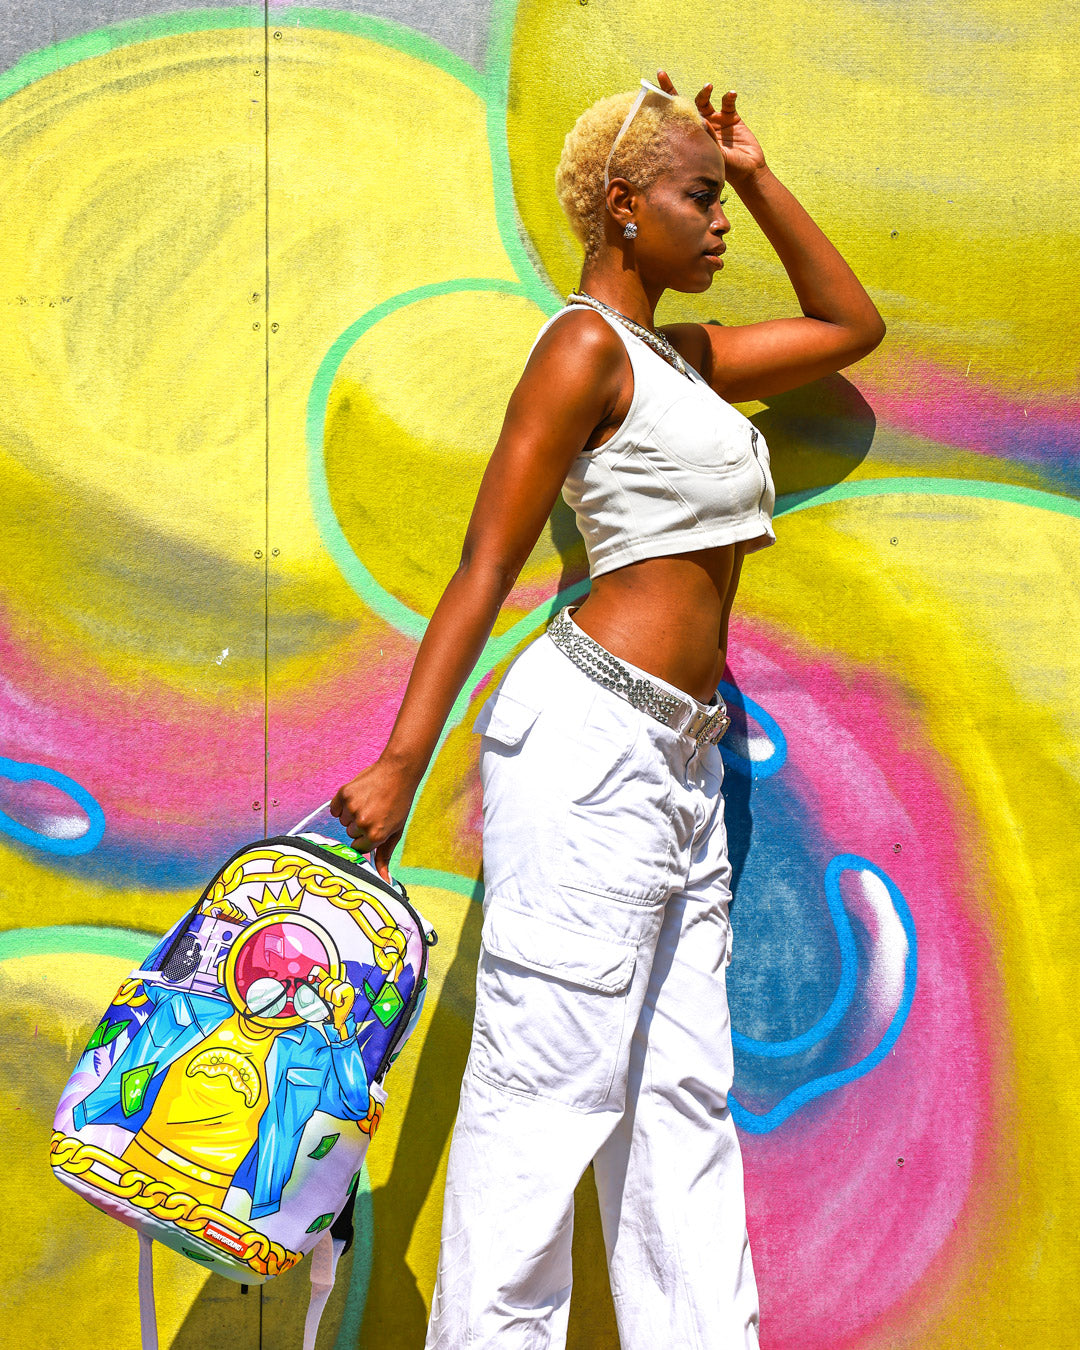 SPRAYGROUND® BACKPACK GIMME MY SPACE BACKPACK